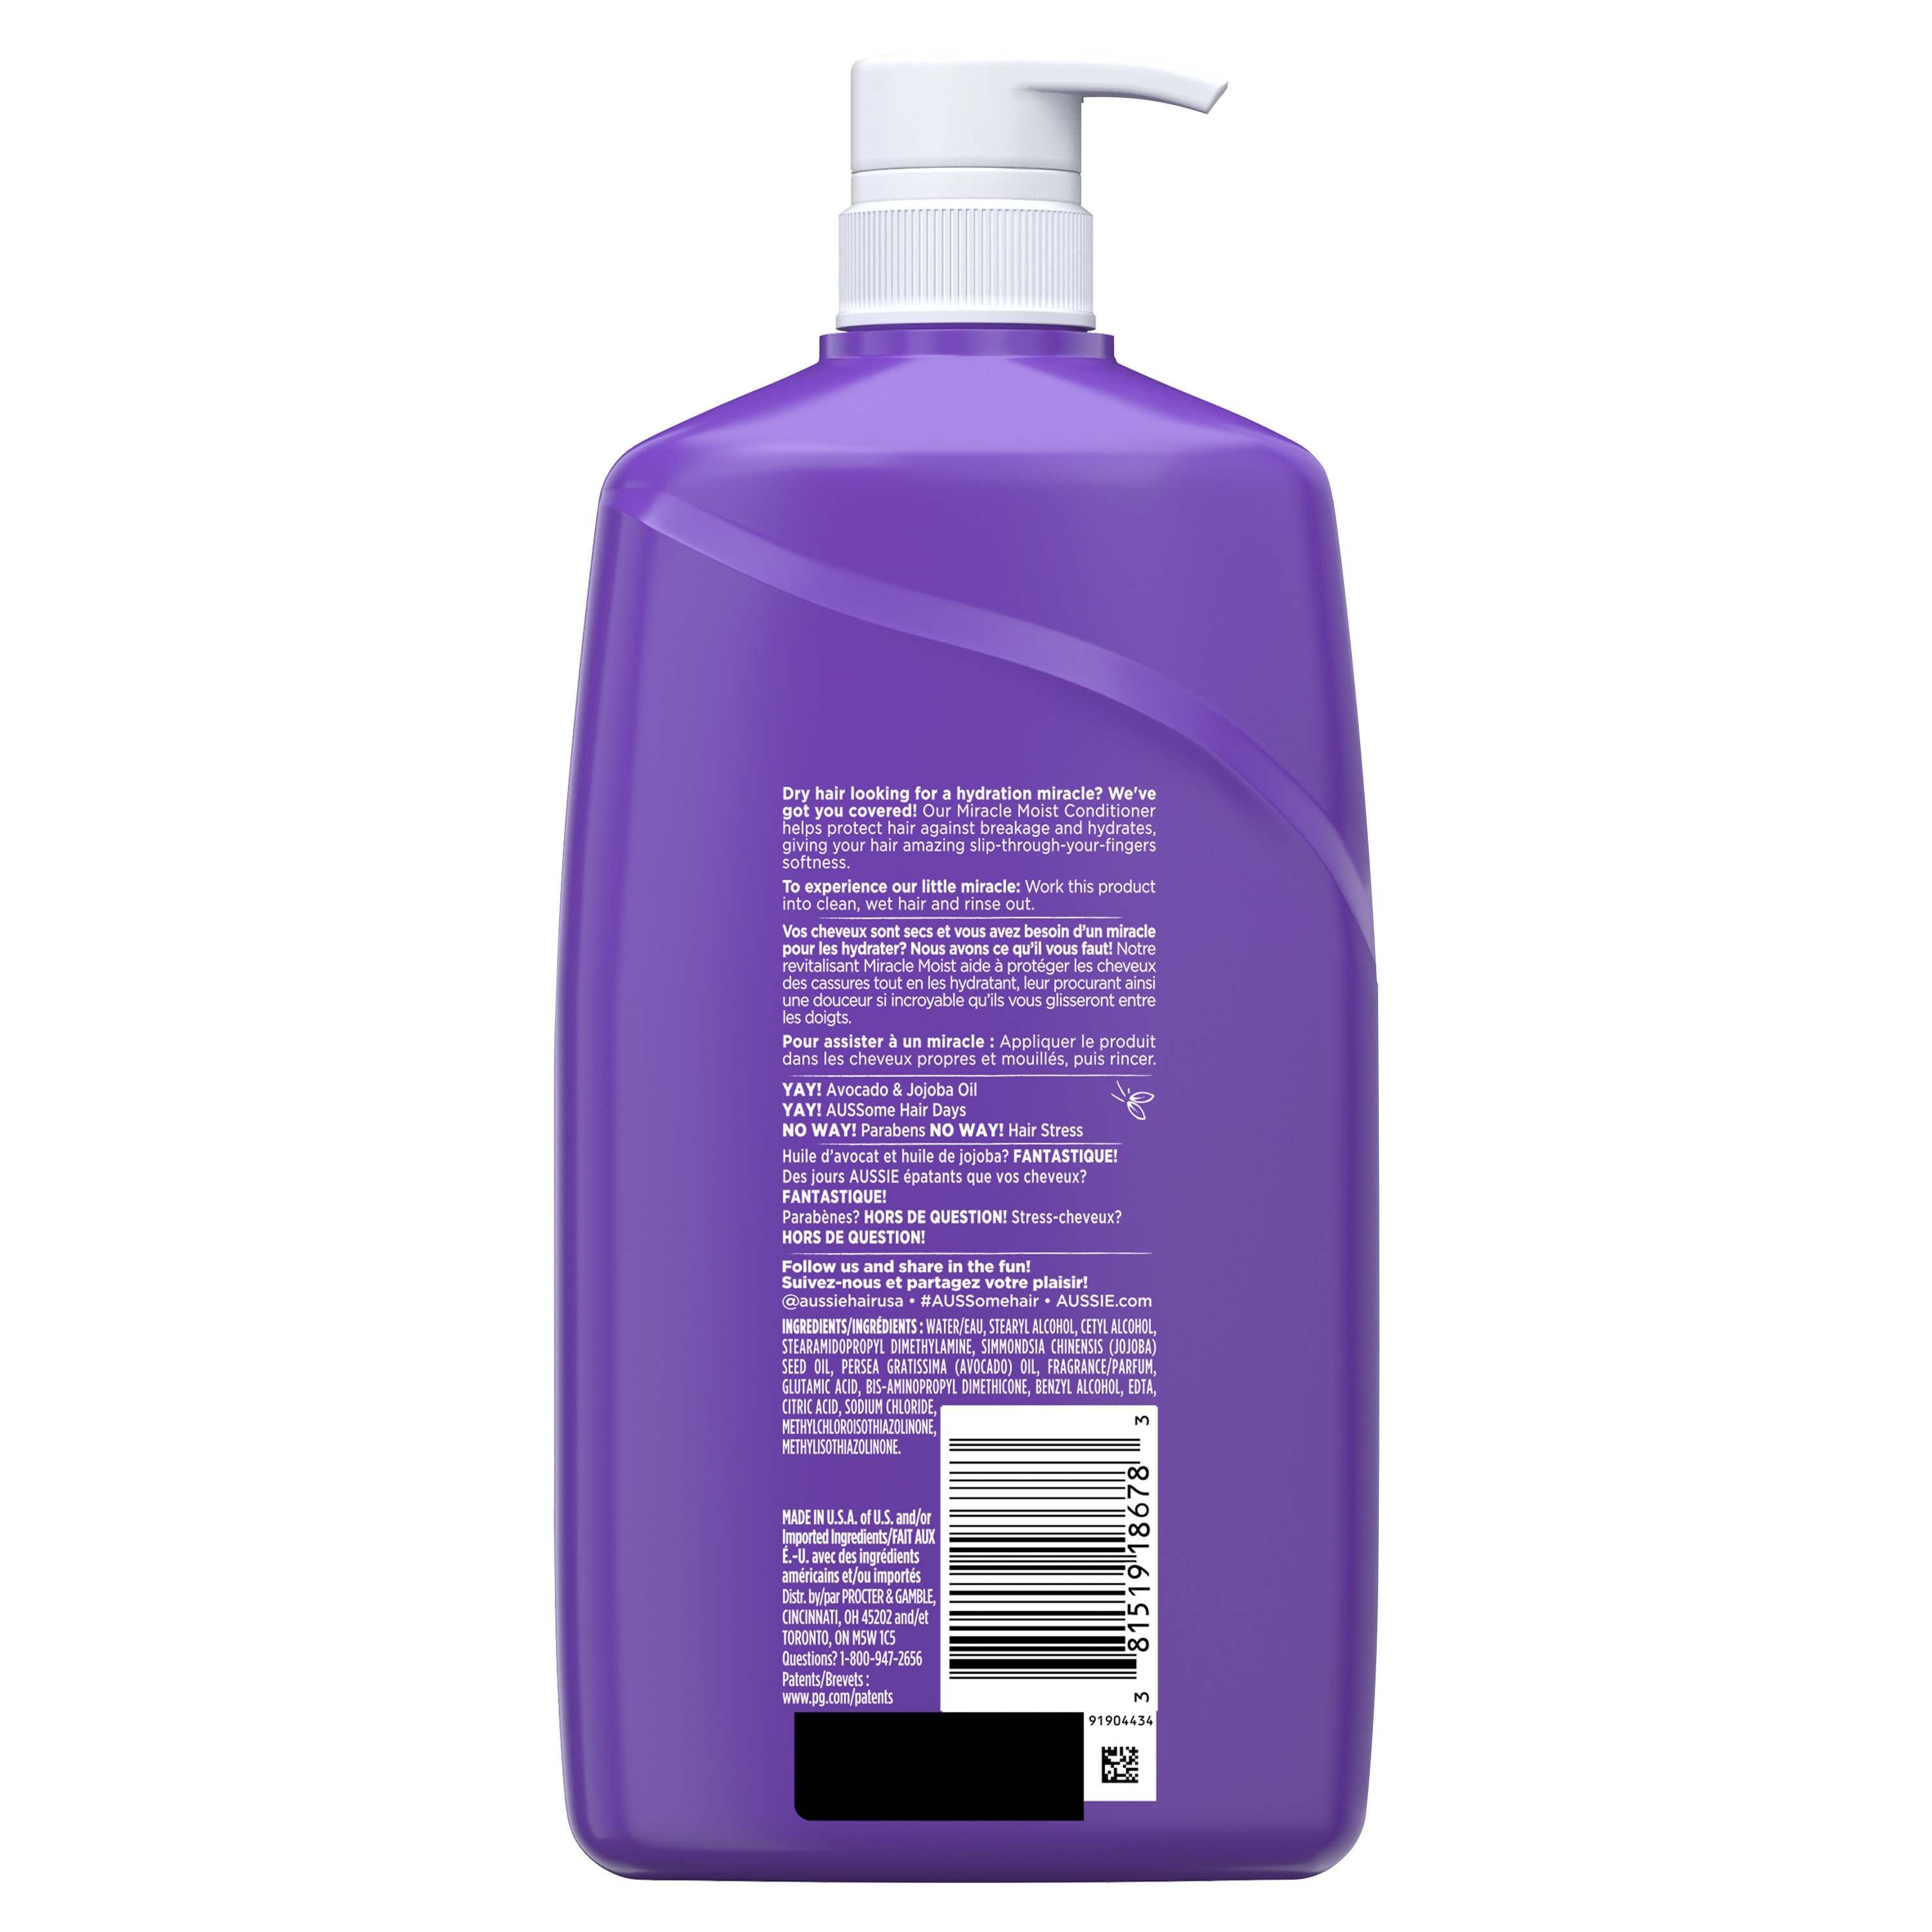 Aussie Miracle Moist Conditioner with Avocado, Paraben Free, For Dry Hair Types, 26.2 oz - image 2 of 9